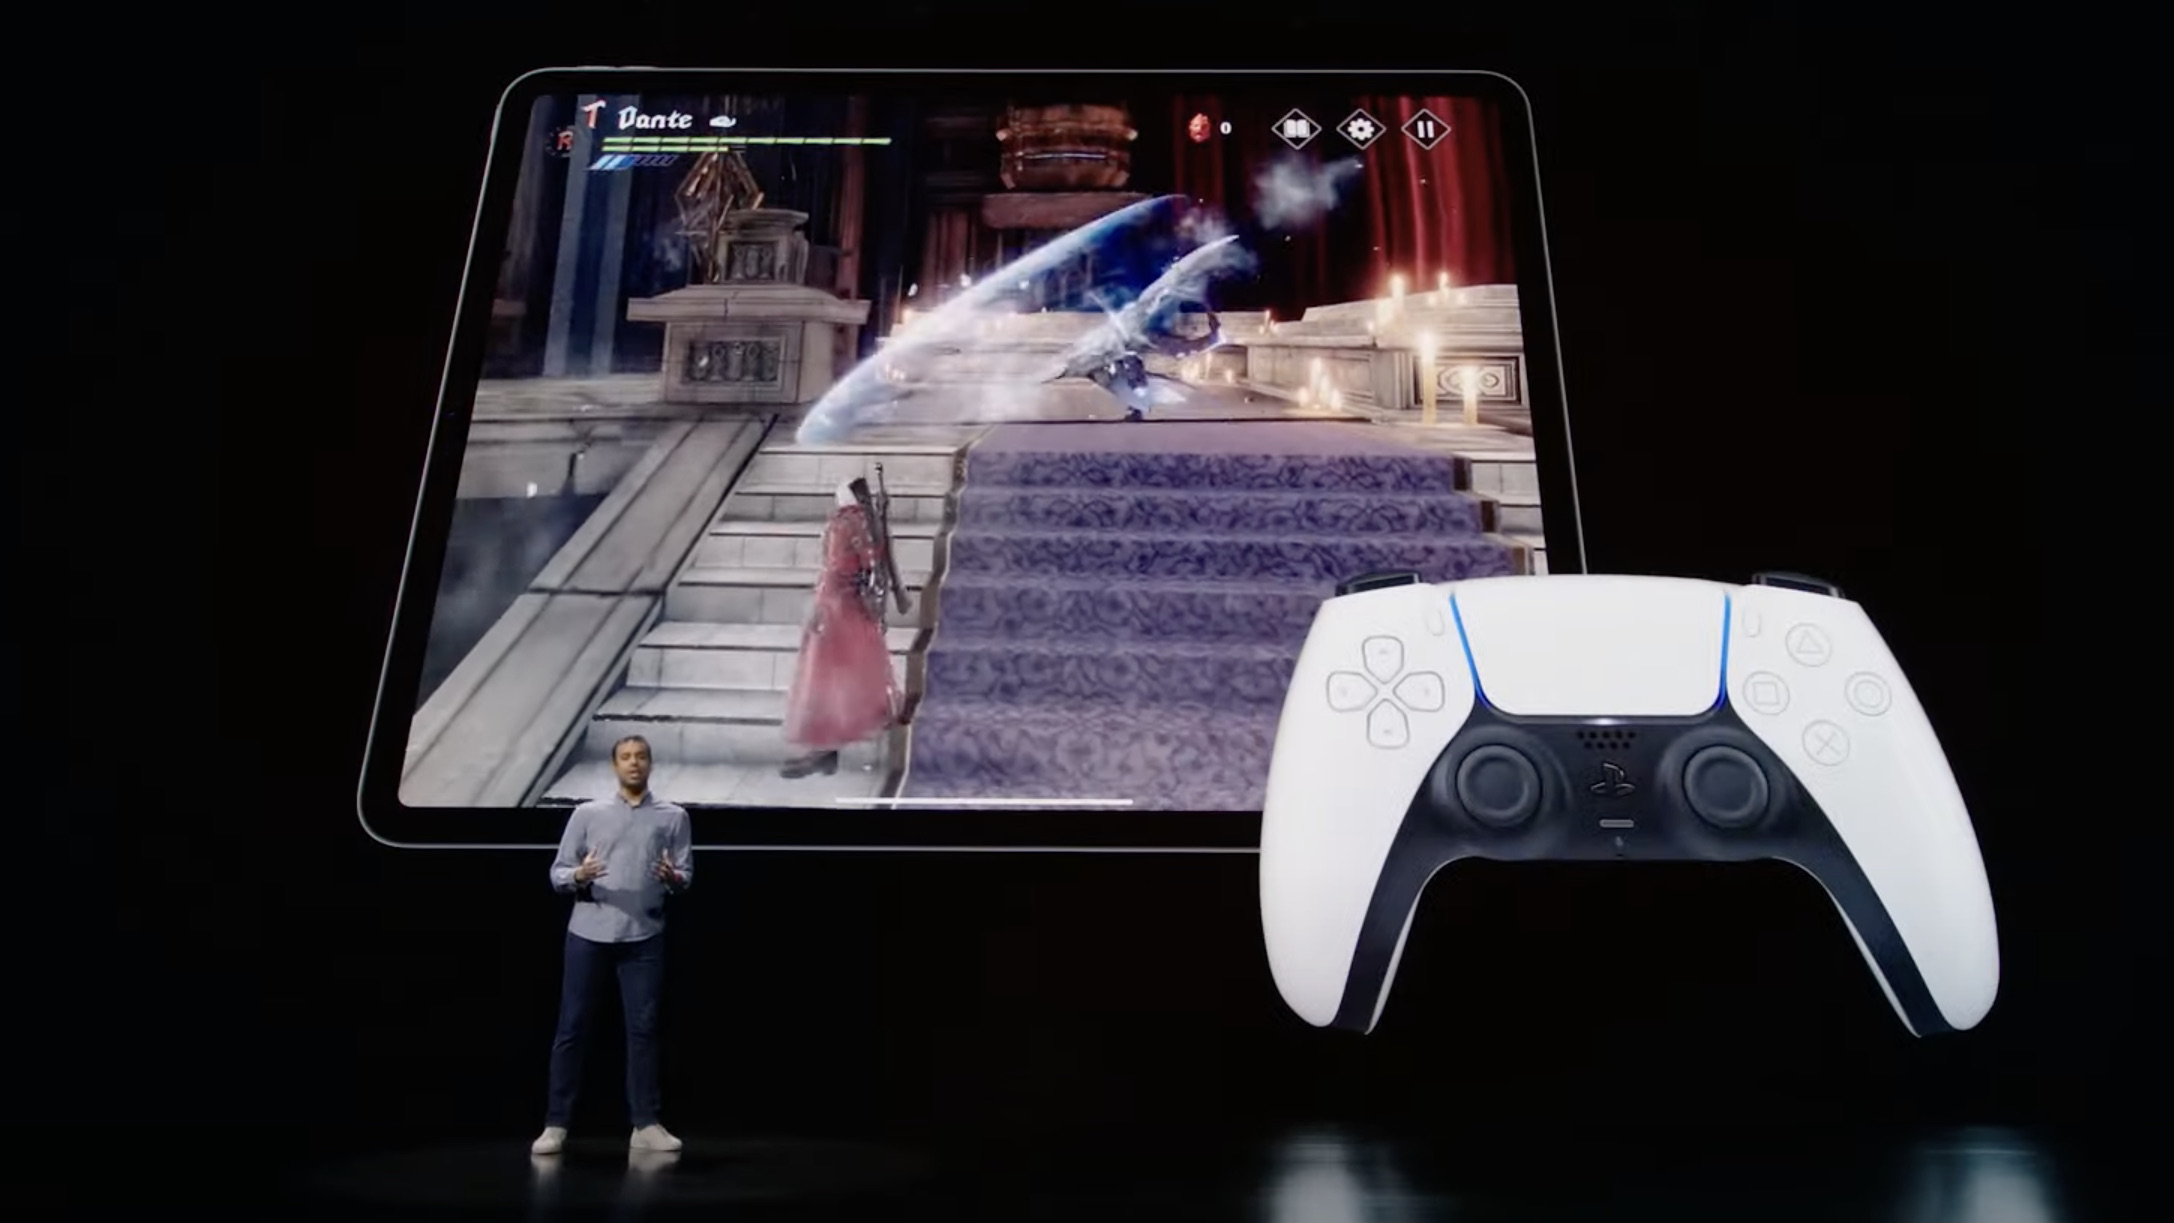 An Apple presentation showing the iPad Pro playing Devil May Cry connected to a PS5 DualSense controller